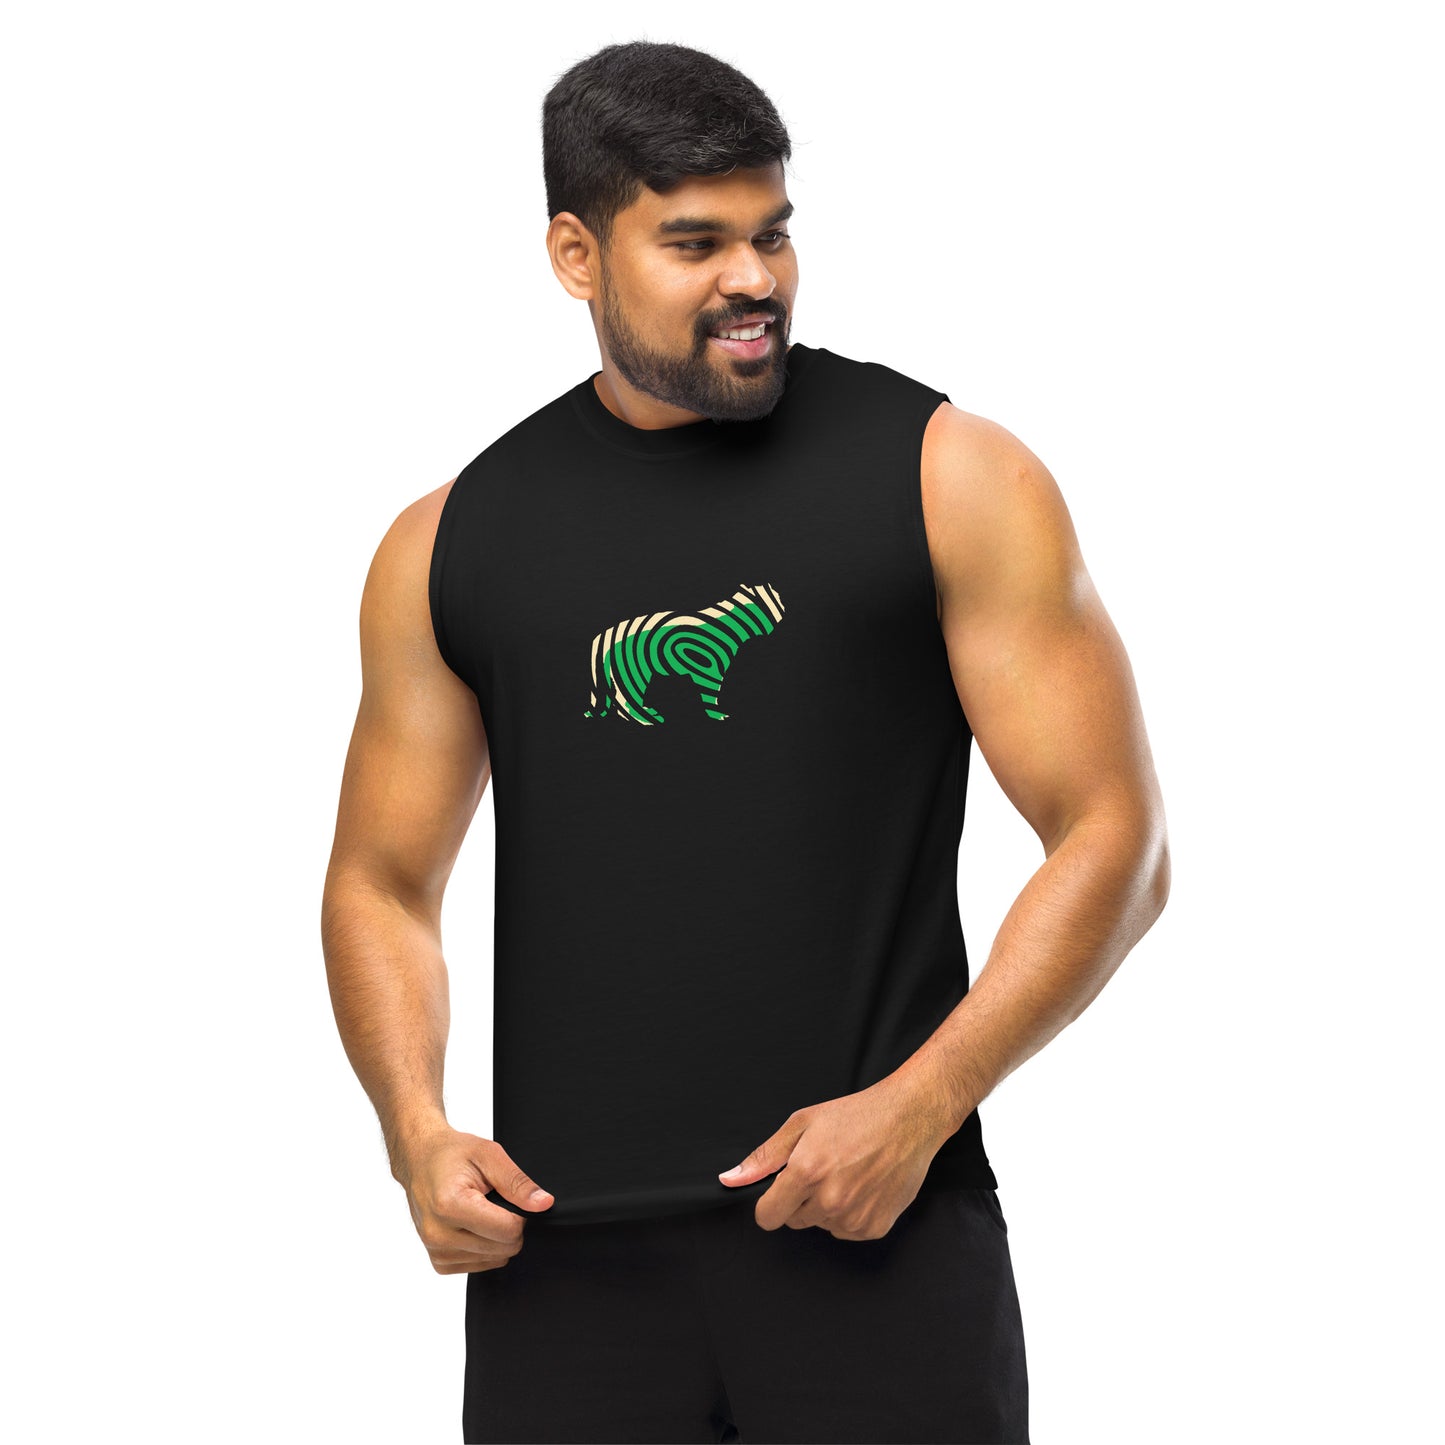 MAKE YOUR MARK Muscle Shirt